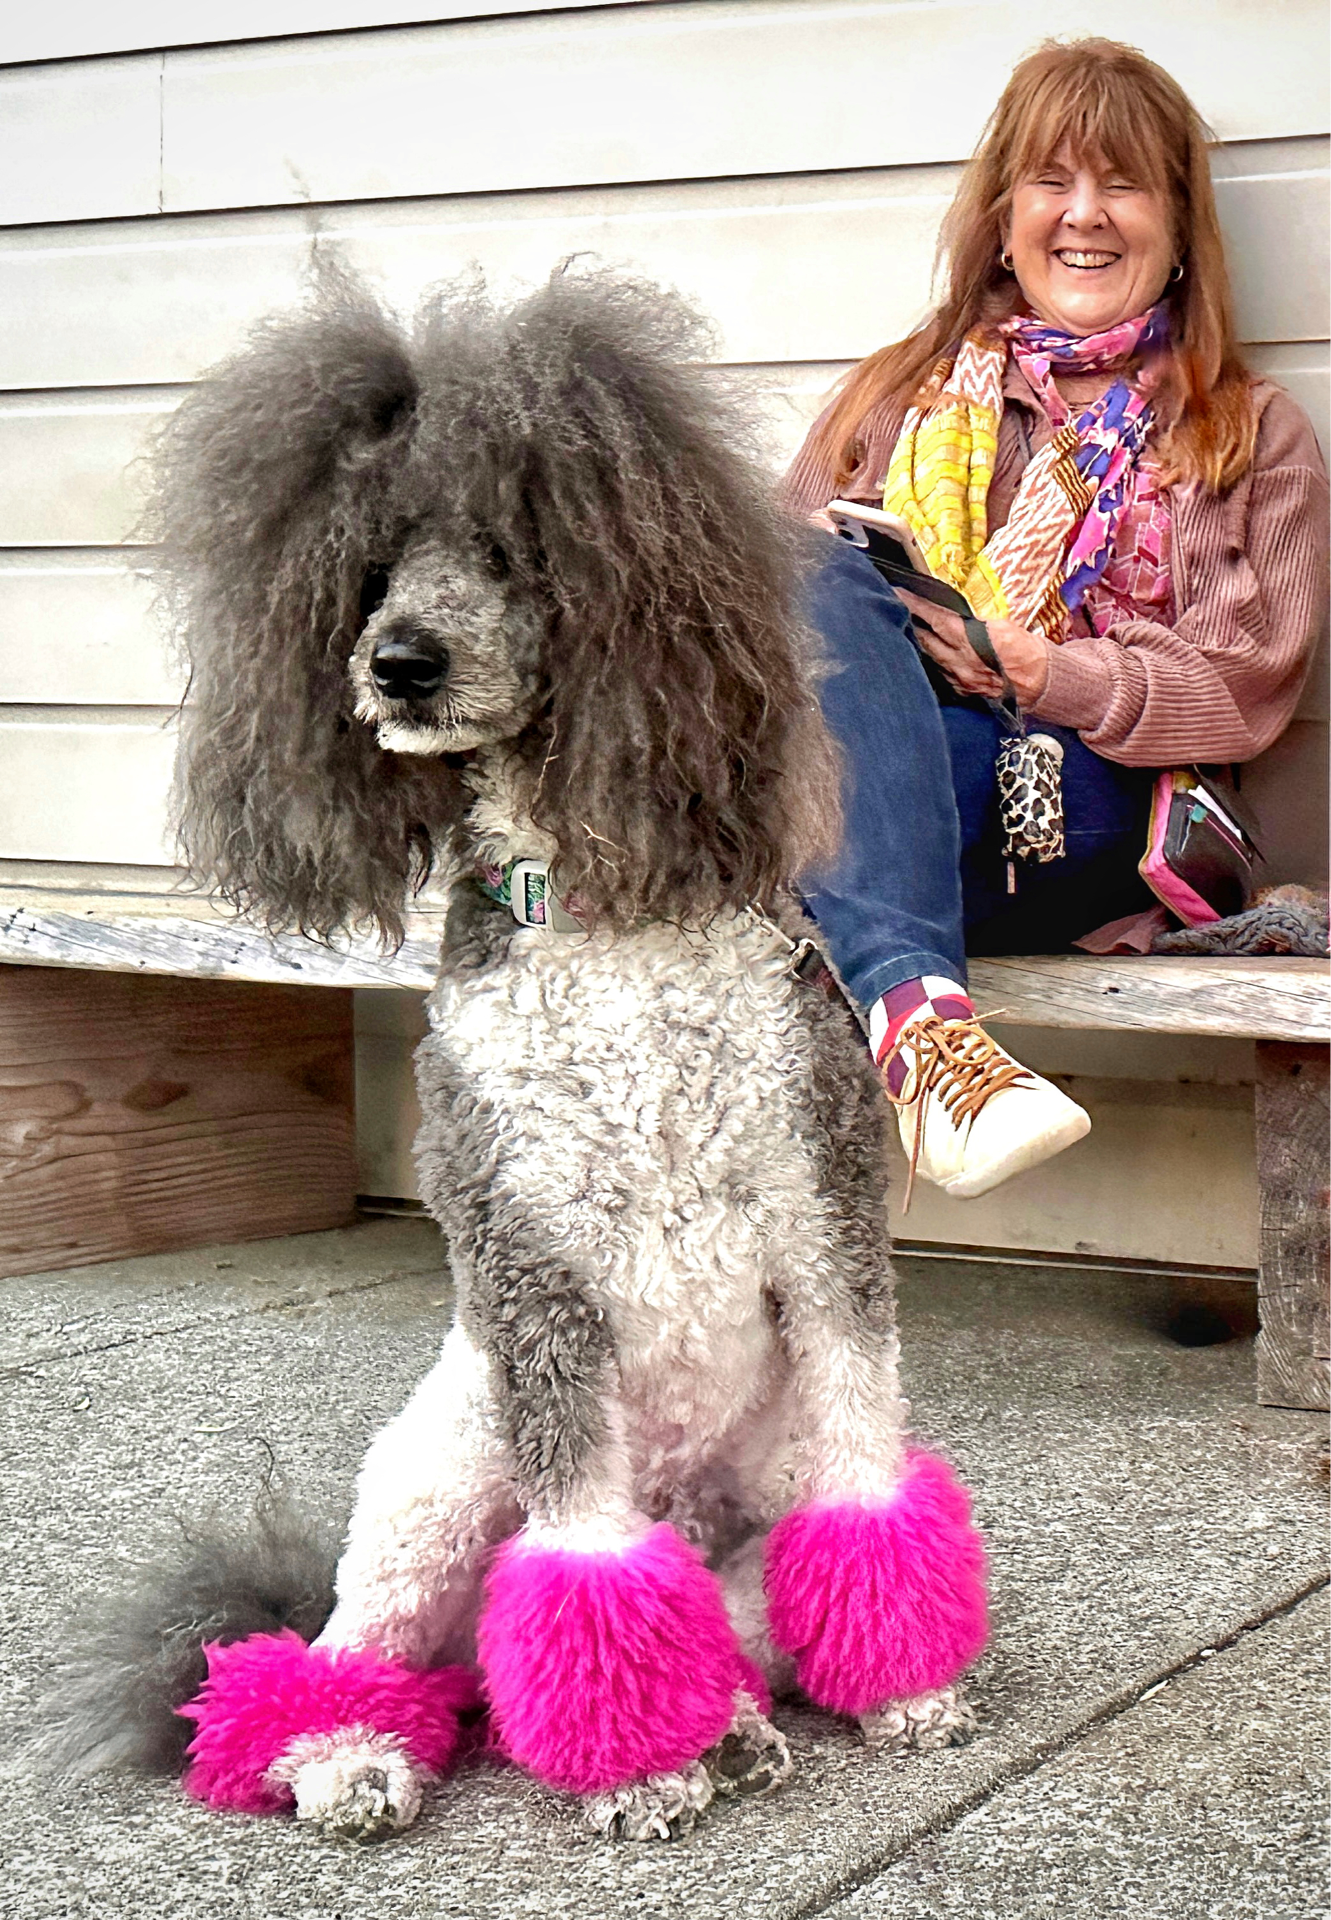 A woman is sitting on a bench next to a poodle.